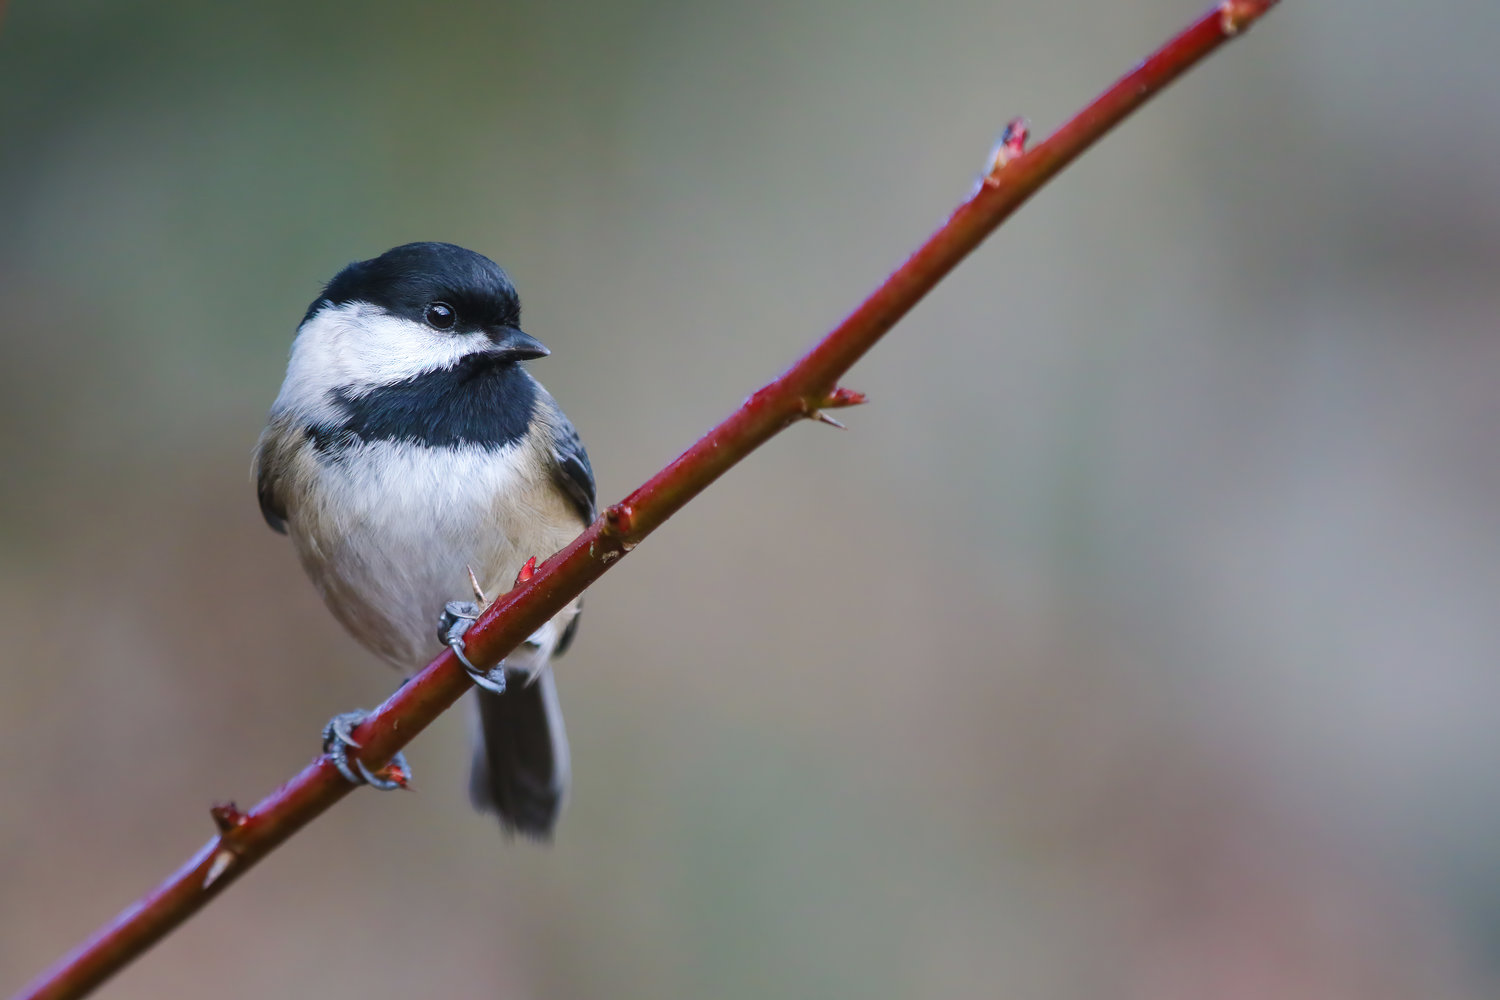 This is the Black-capped Chickadee.